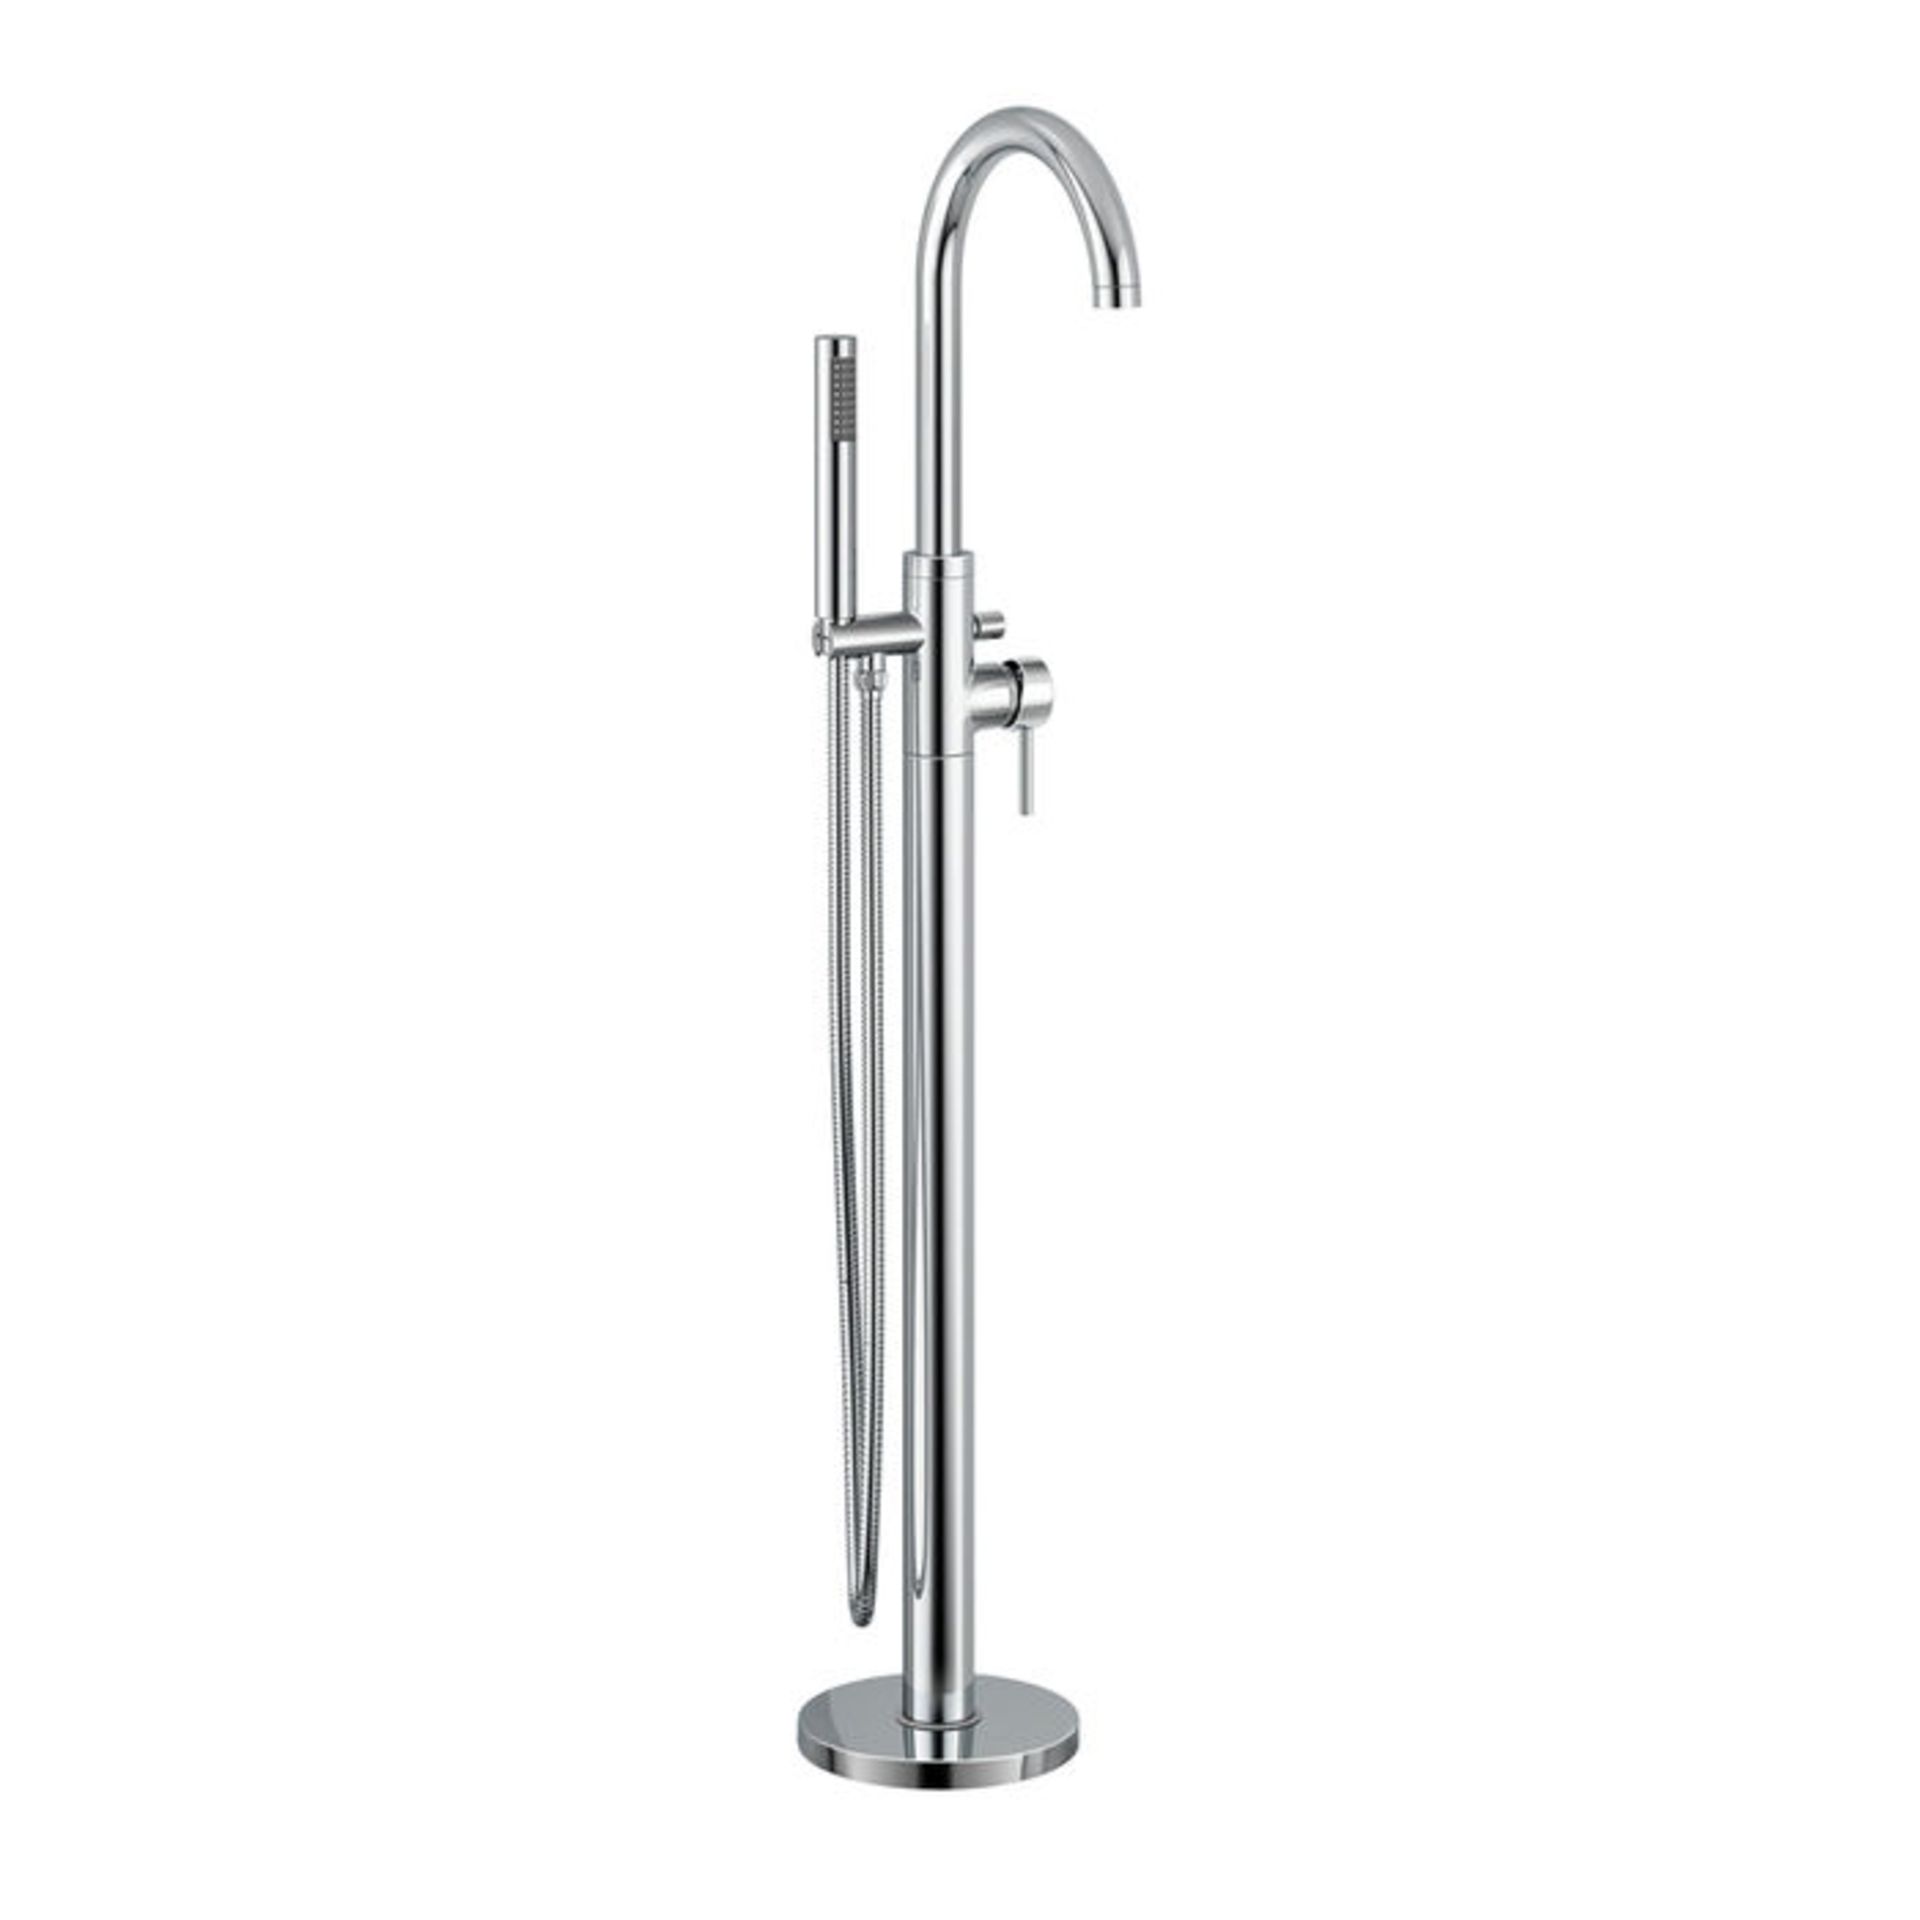 (MQ10) Freestanding Bath Mixer Tap & Handheld Shower. Ideal for bathing and/or showering Craf...